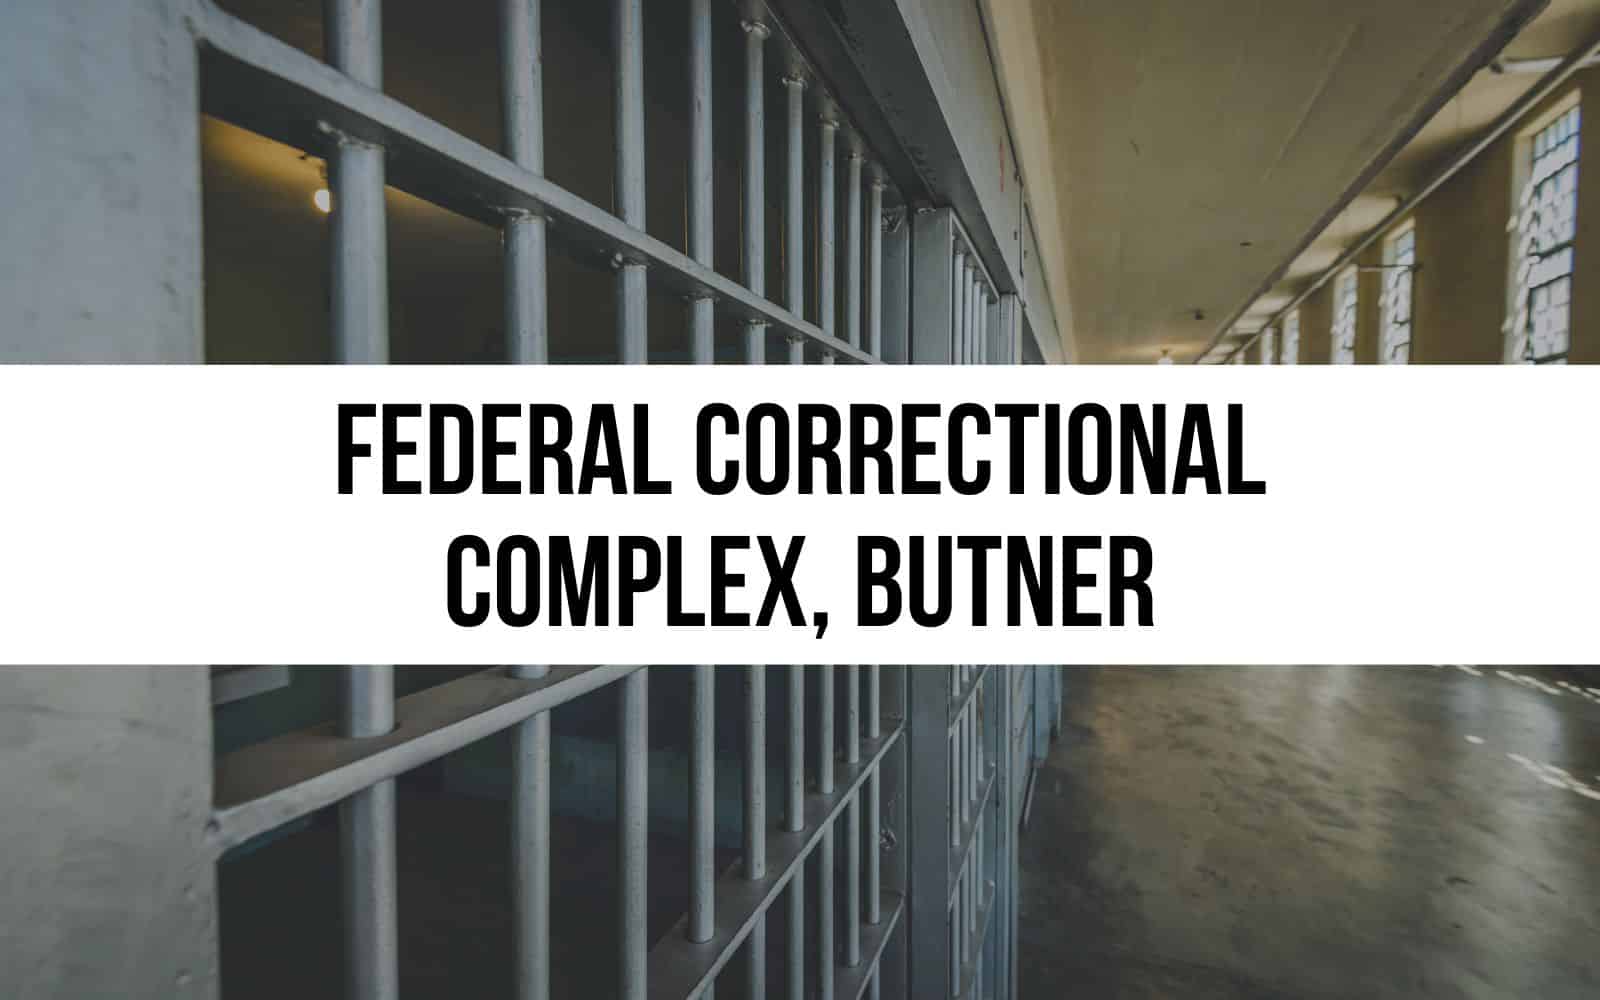 Federal Correctional Complex, Butner